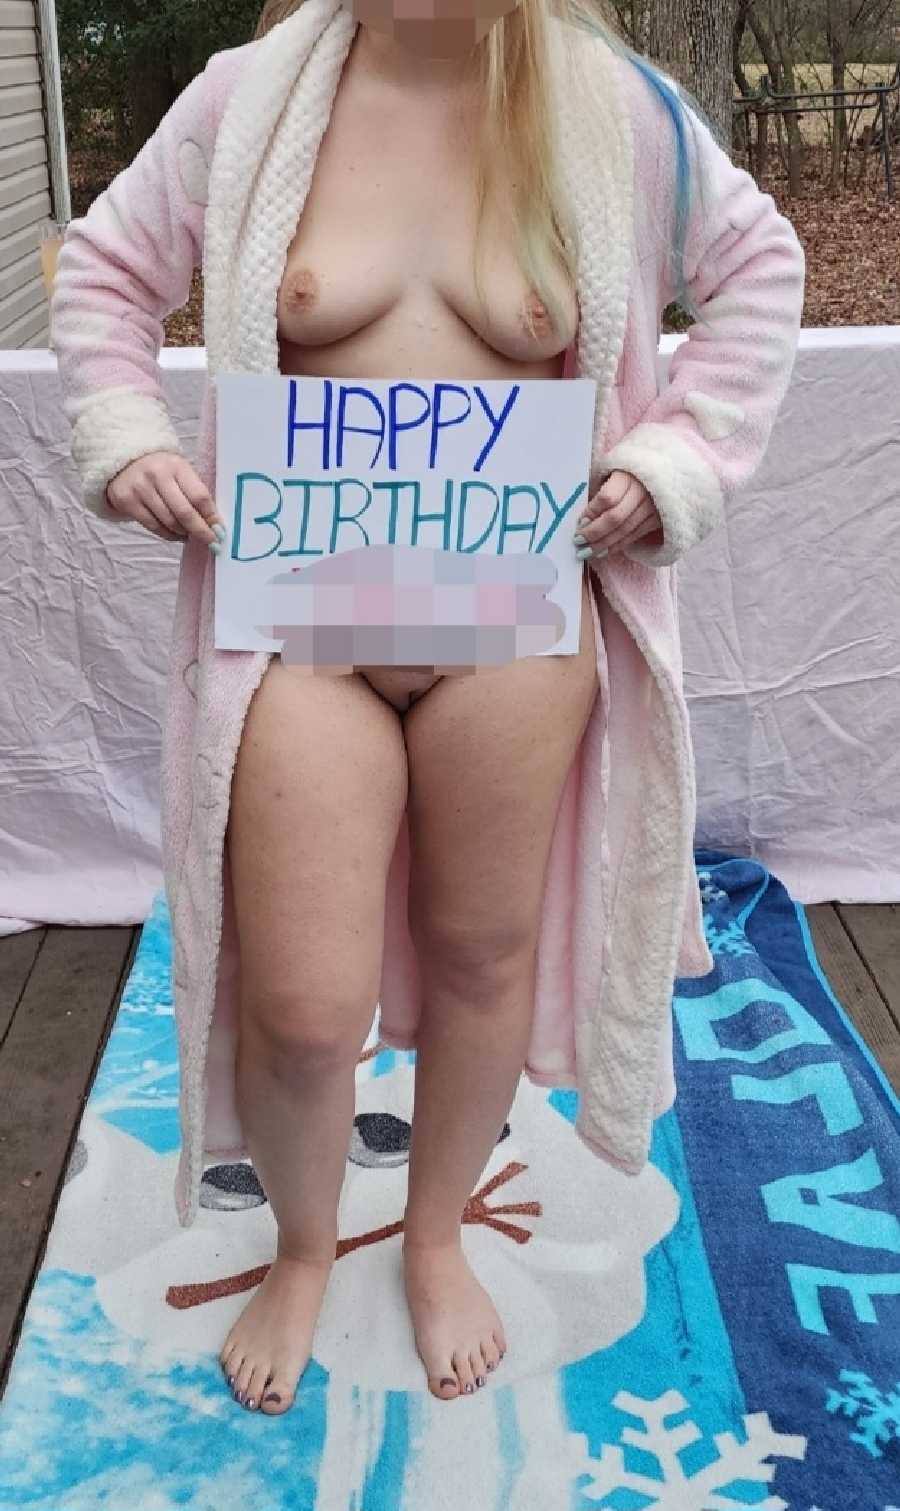 Sexy Birthday Photoshoot for a Male Friend!!